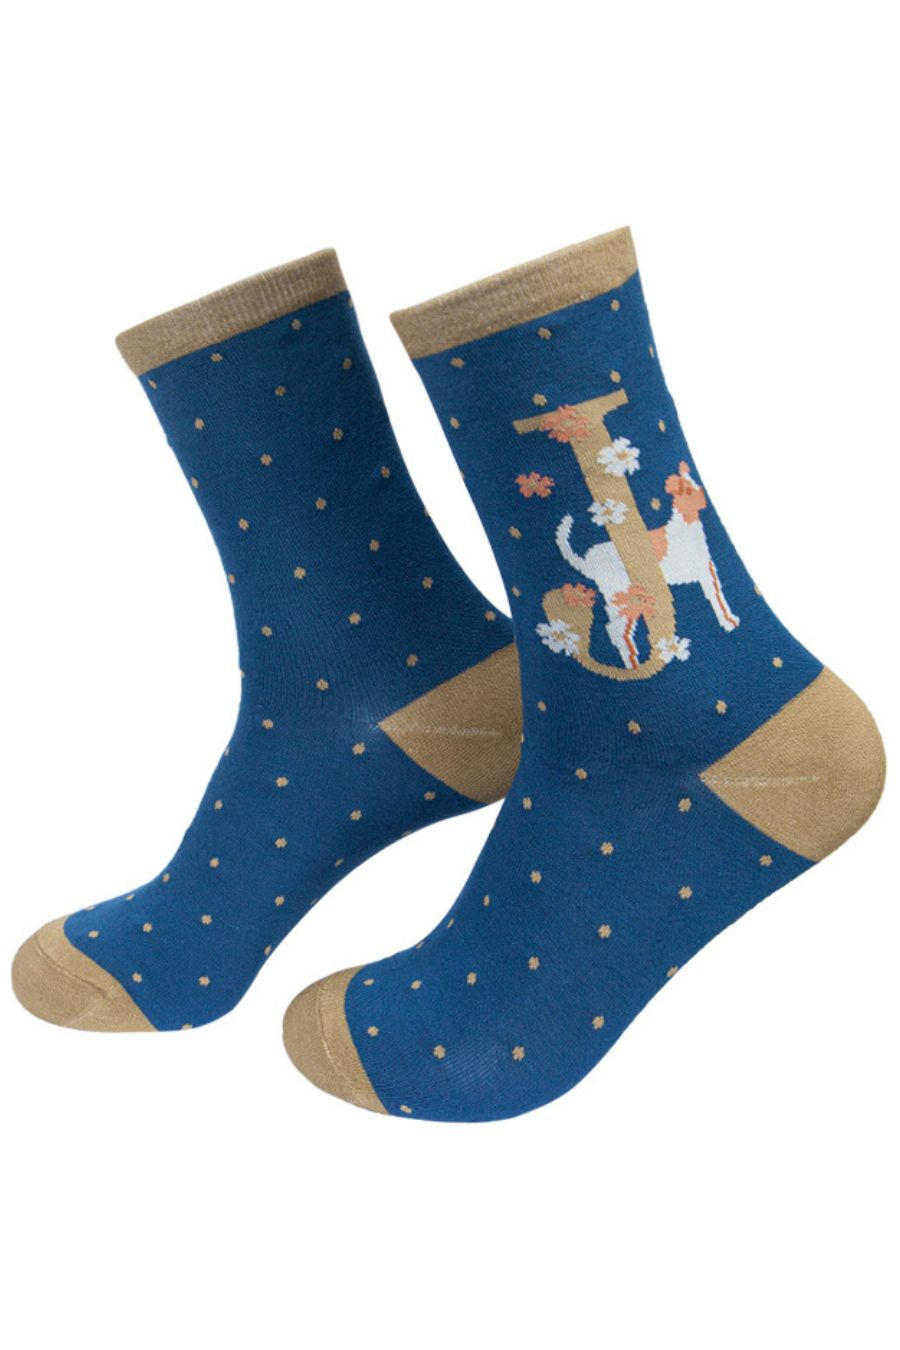 blue, mustard yellow bamboo socks with a letter J and a jack russell dog